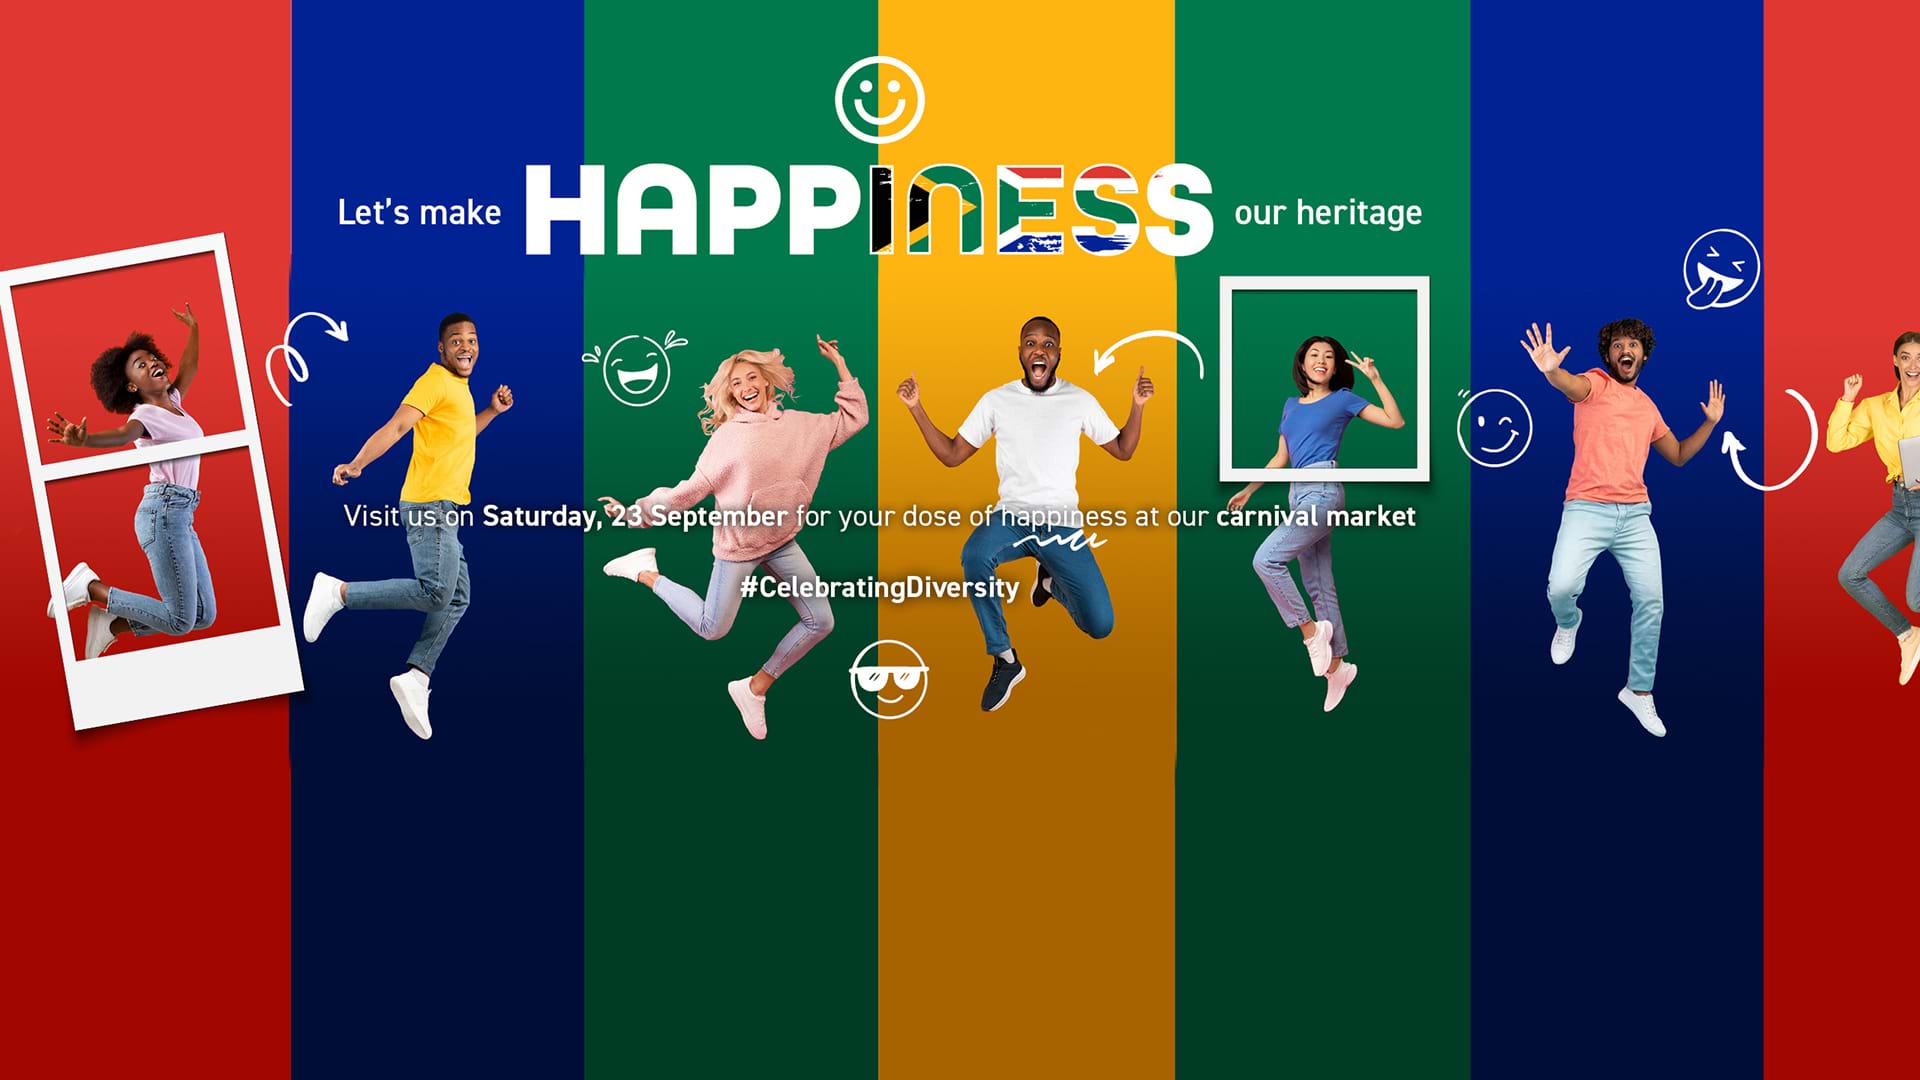 LET'S MAKE HAPPINESS OUR HERITAGE